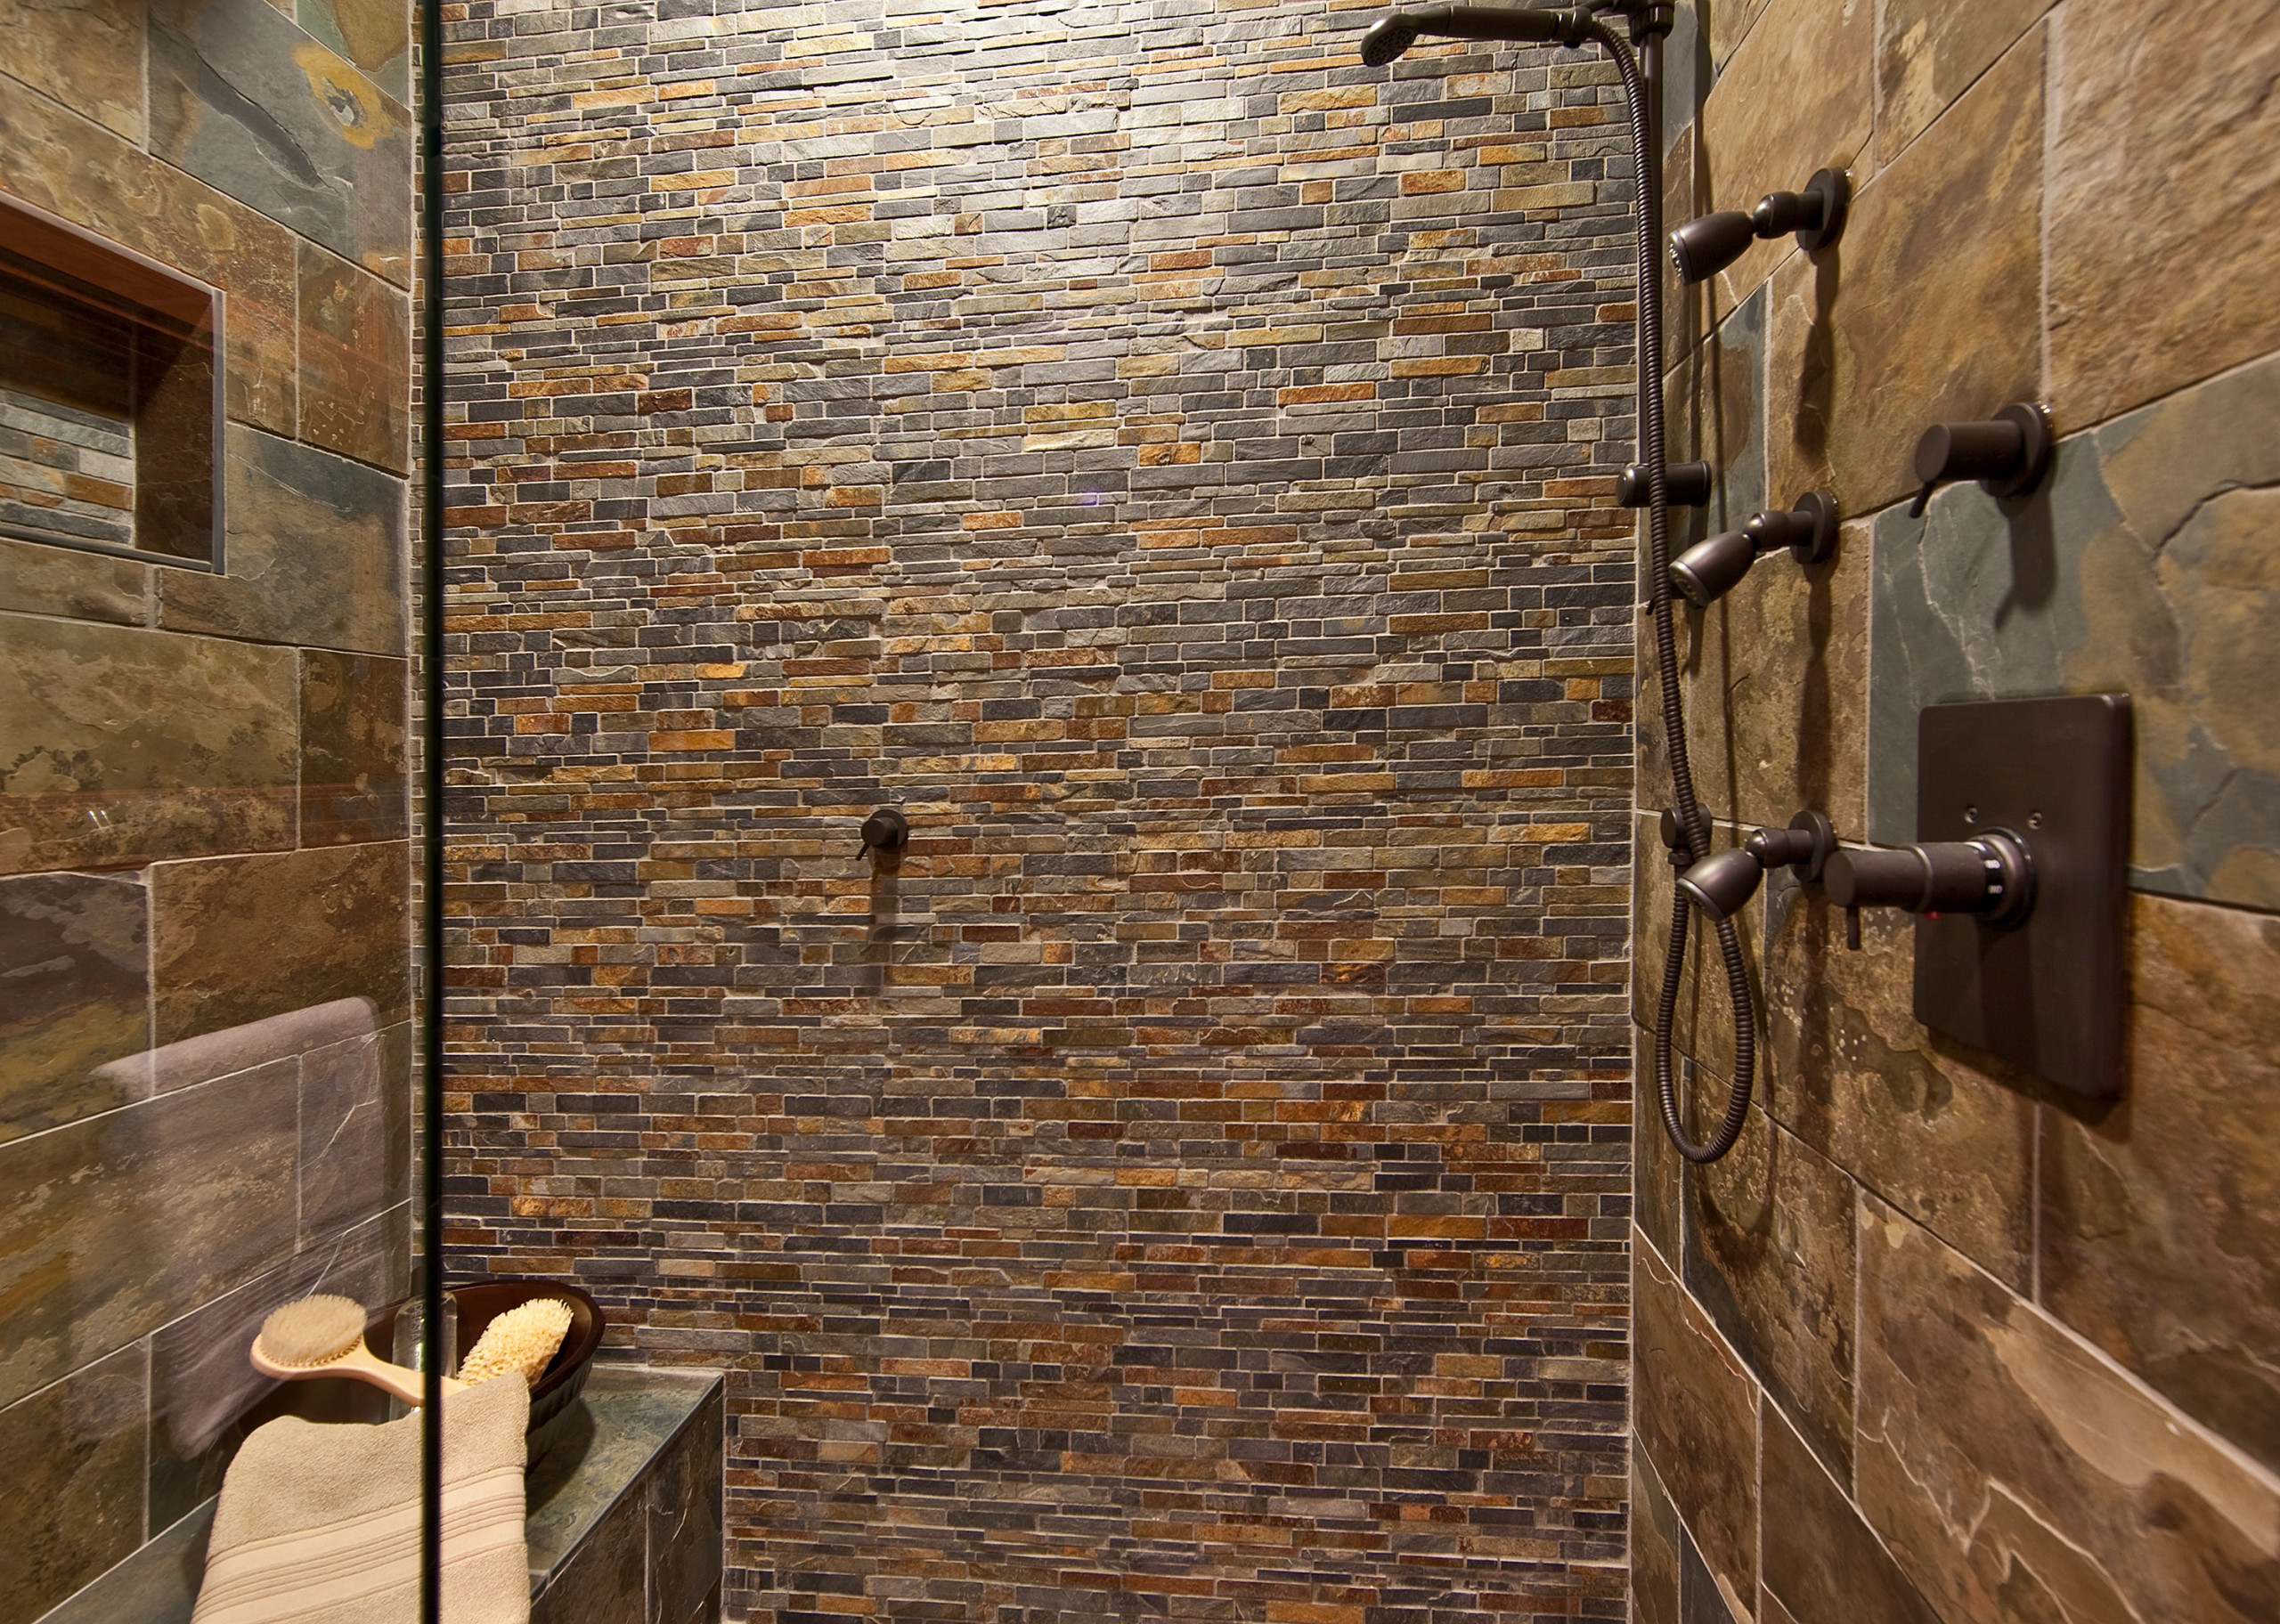 75 Beautiful Rustic Stone Tile Bathroom Pictures &amp; Ideas - January, 2022 |  Houzz